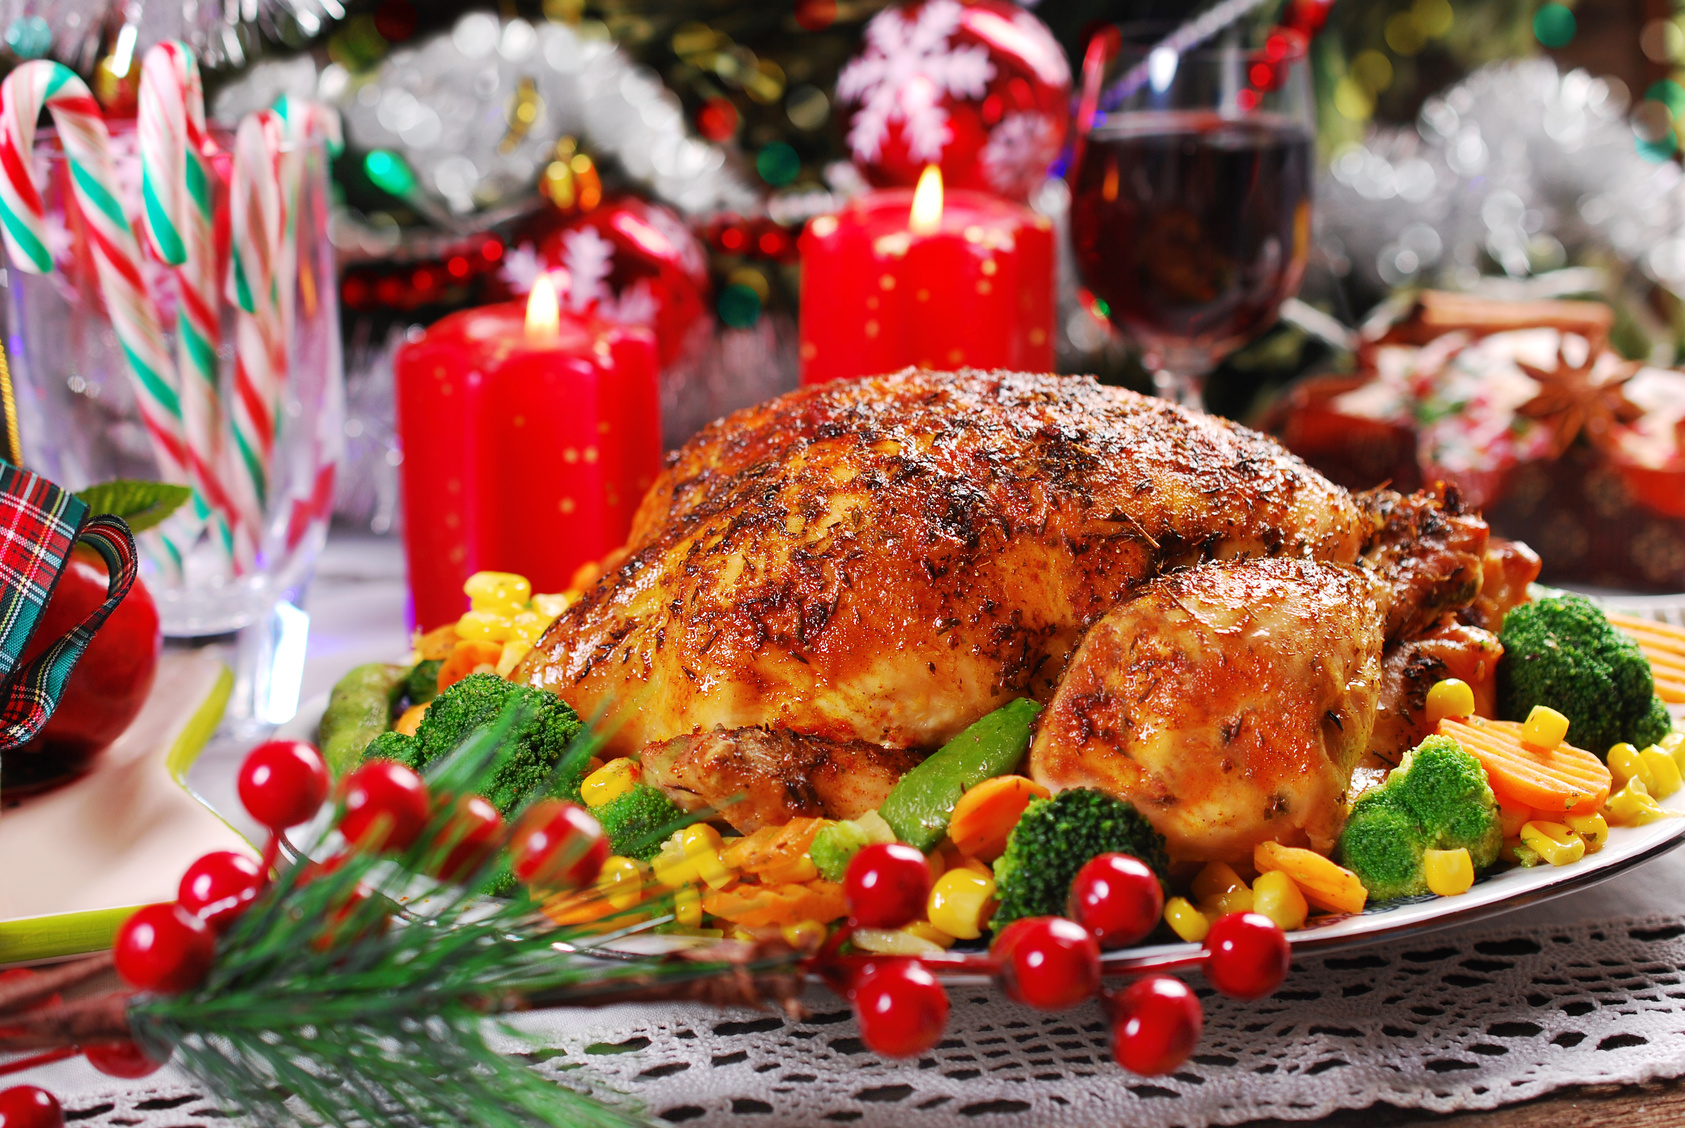 roasted chicken with vegetables for christmas - Le Blog NutriformLab